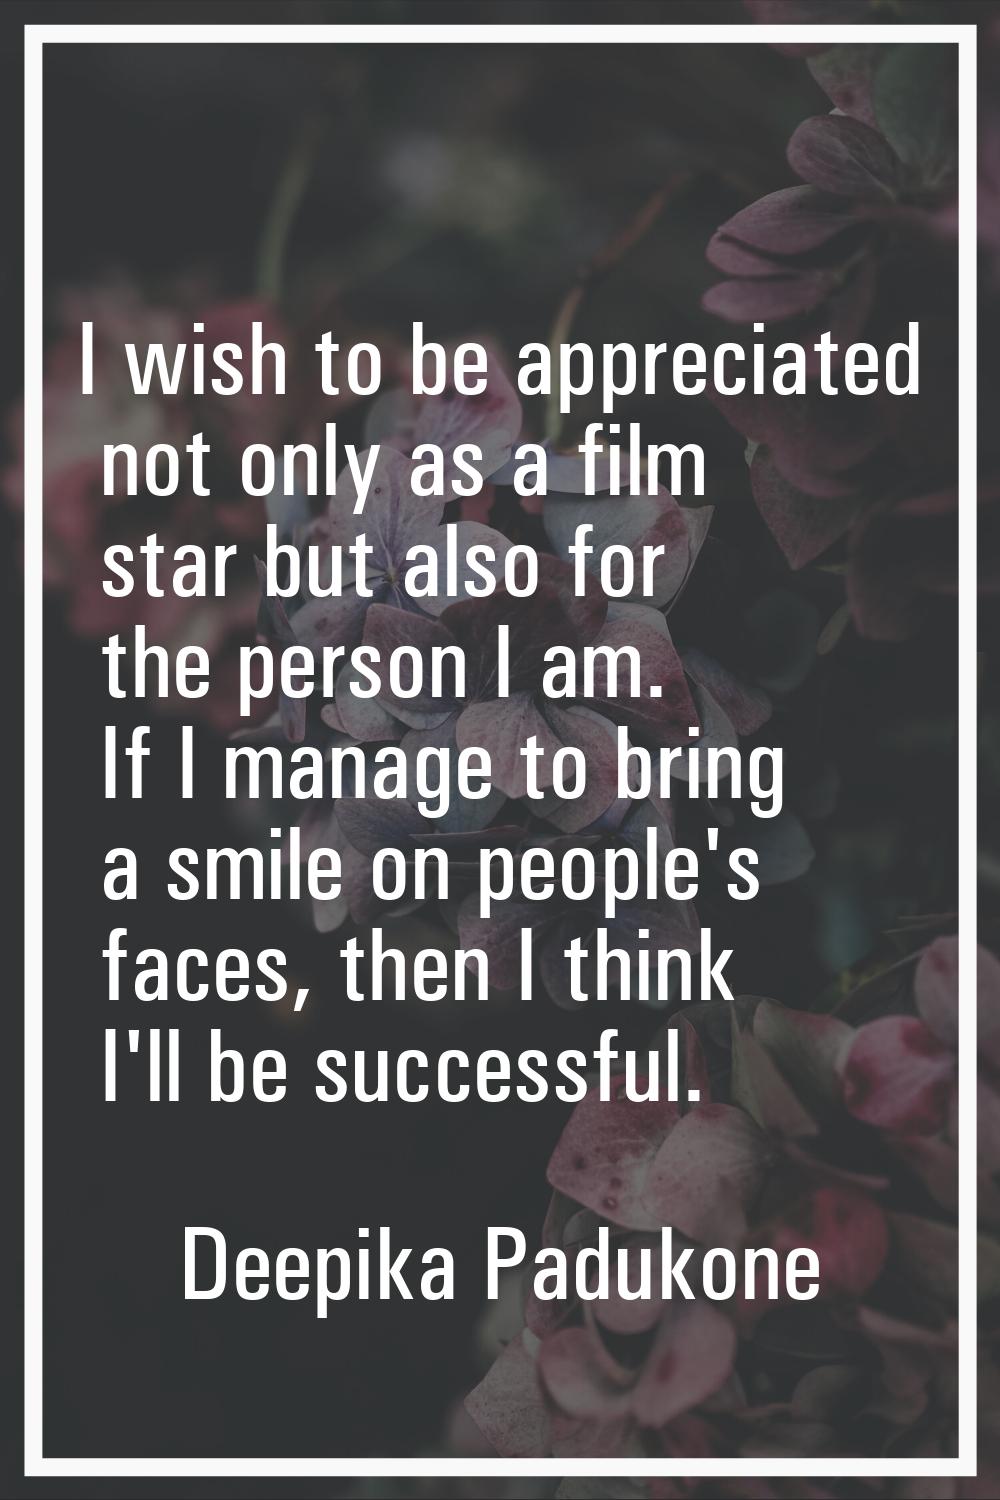 I wish to be appreciated not only as a film star but also for the person I am. If I manage to bring